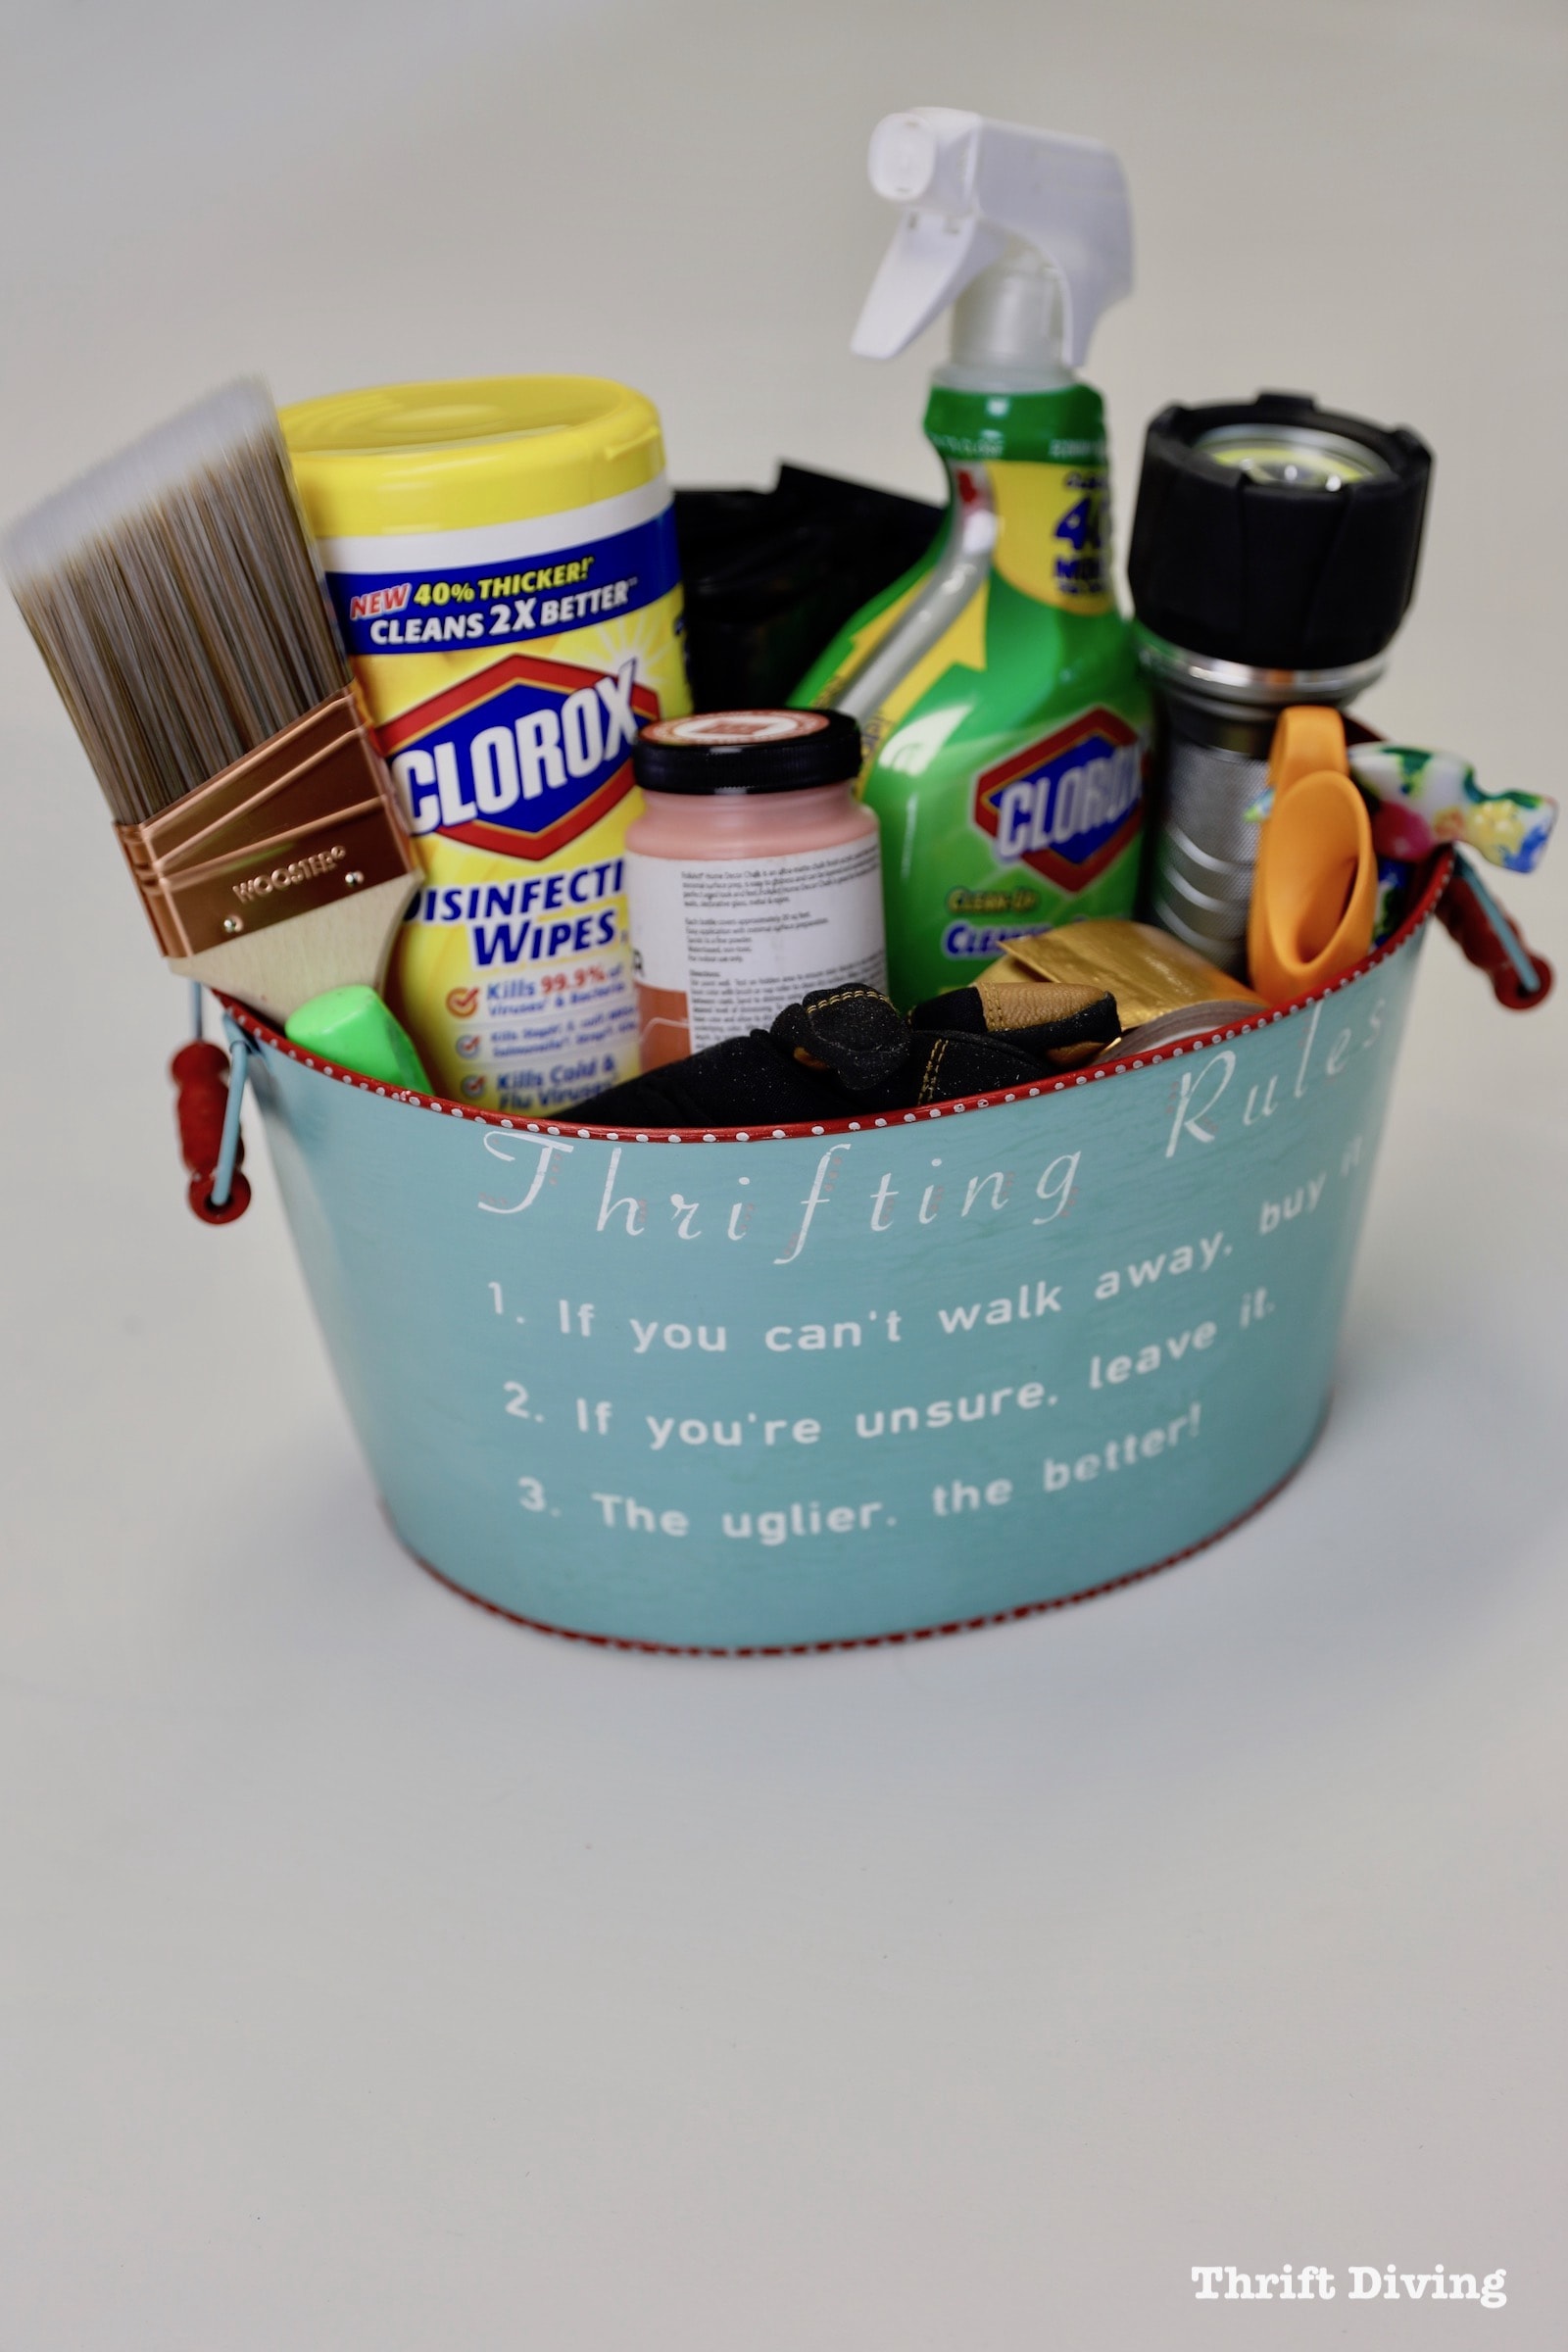 How to Make a Thrifting Survival Kit for your Trunk - Create a survival kit for your trunk and makes a great DIY gift idea for friends that love thrift stores. - Thrift Diving